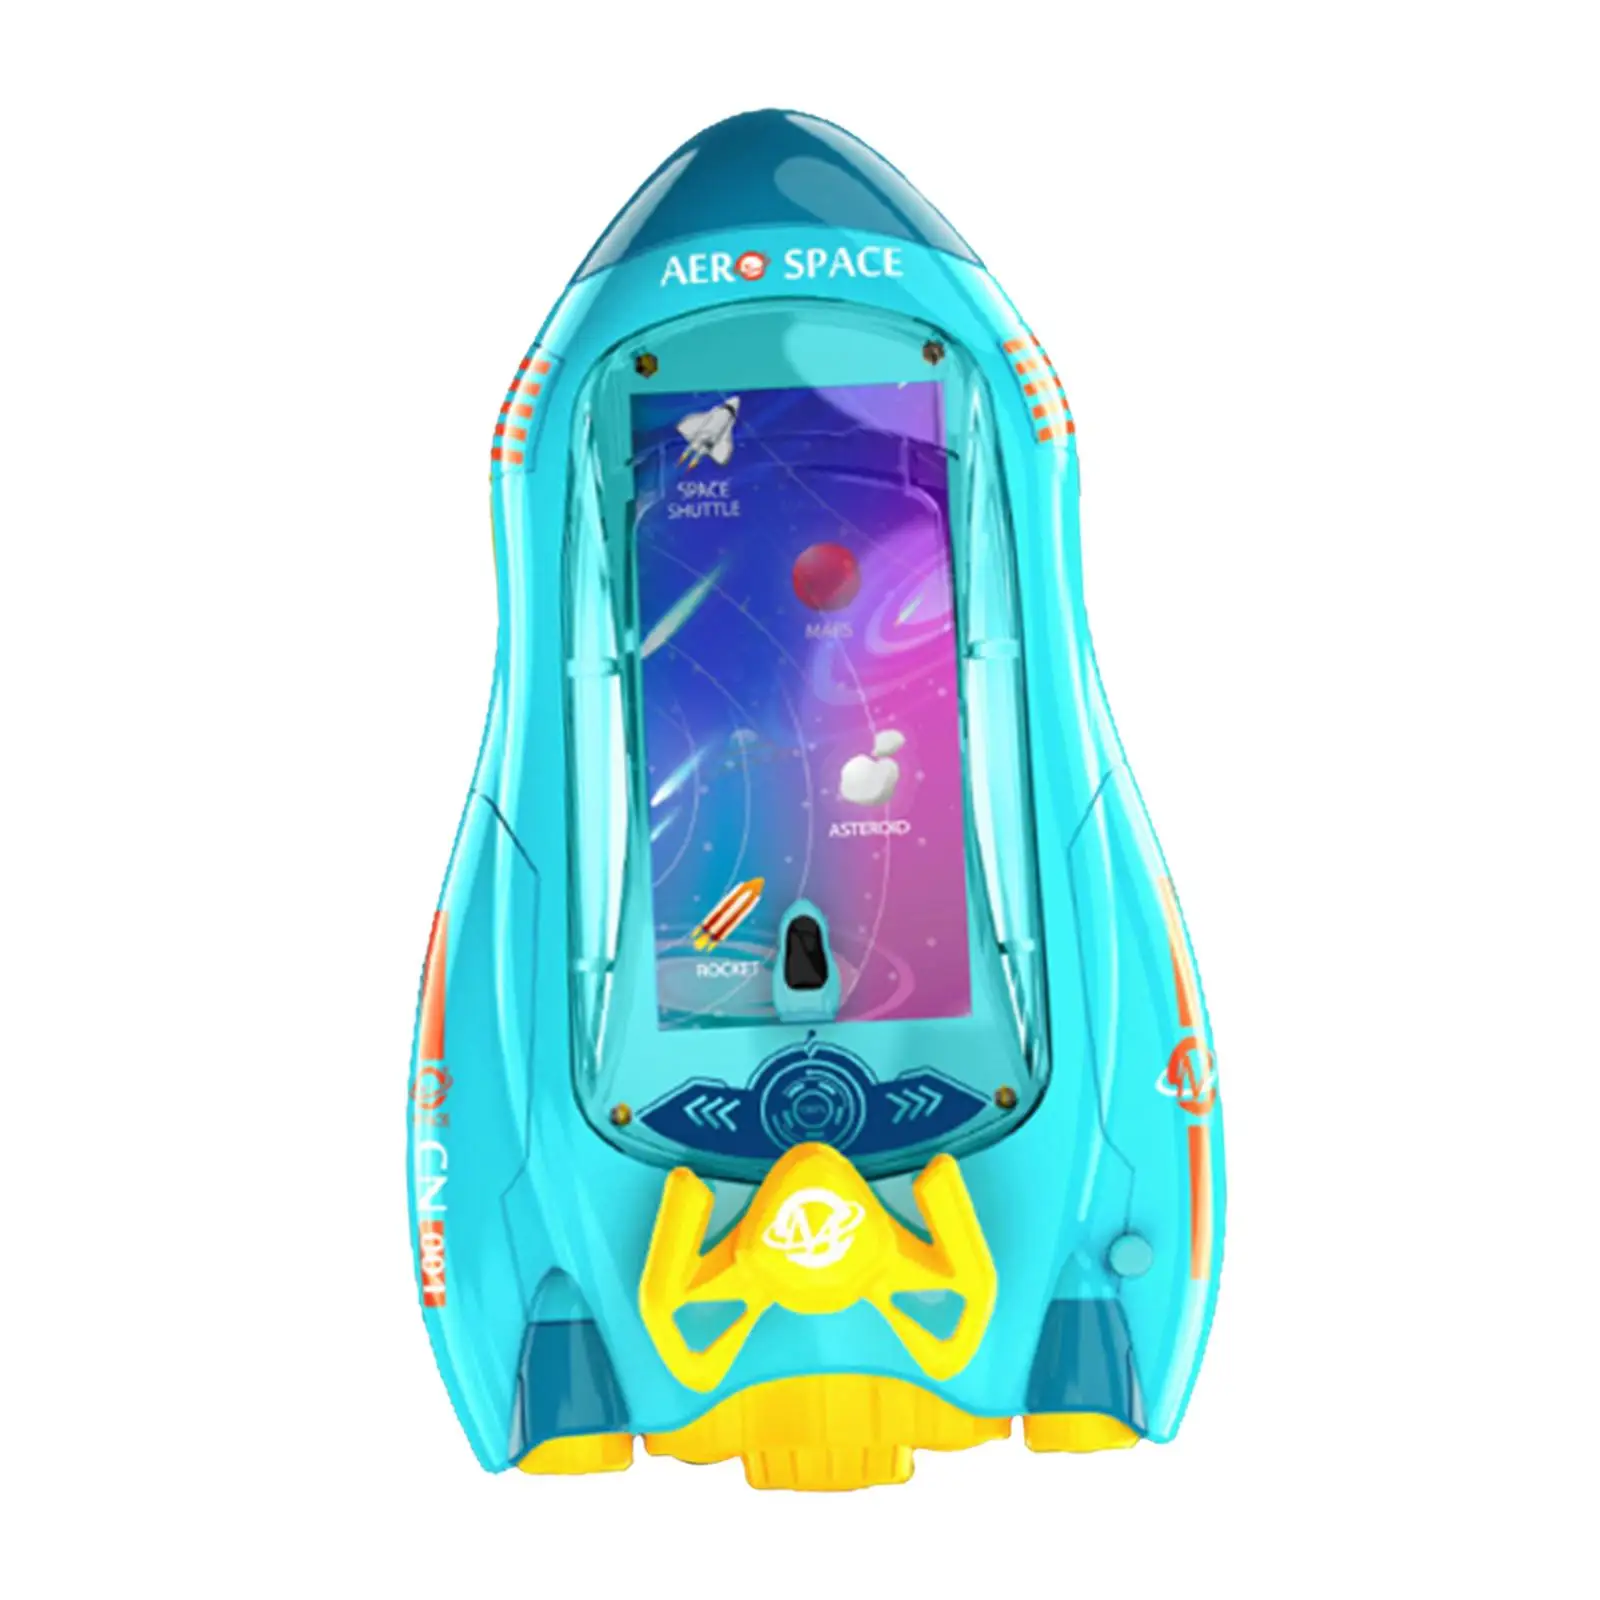 Space Adventure Game Kids Car Simulation Steering Wheel Toy with Music Pretend Play Educational Toys for Kids Boys Holiday Gifts